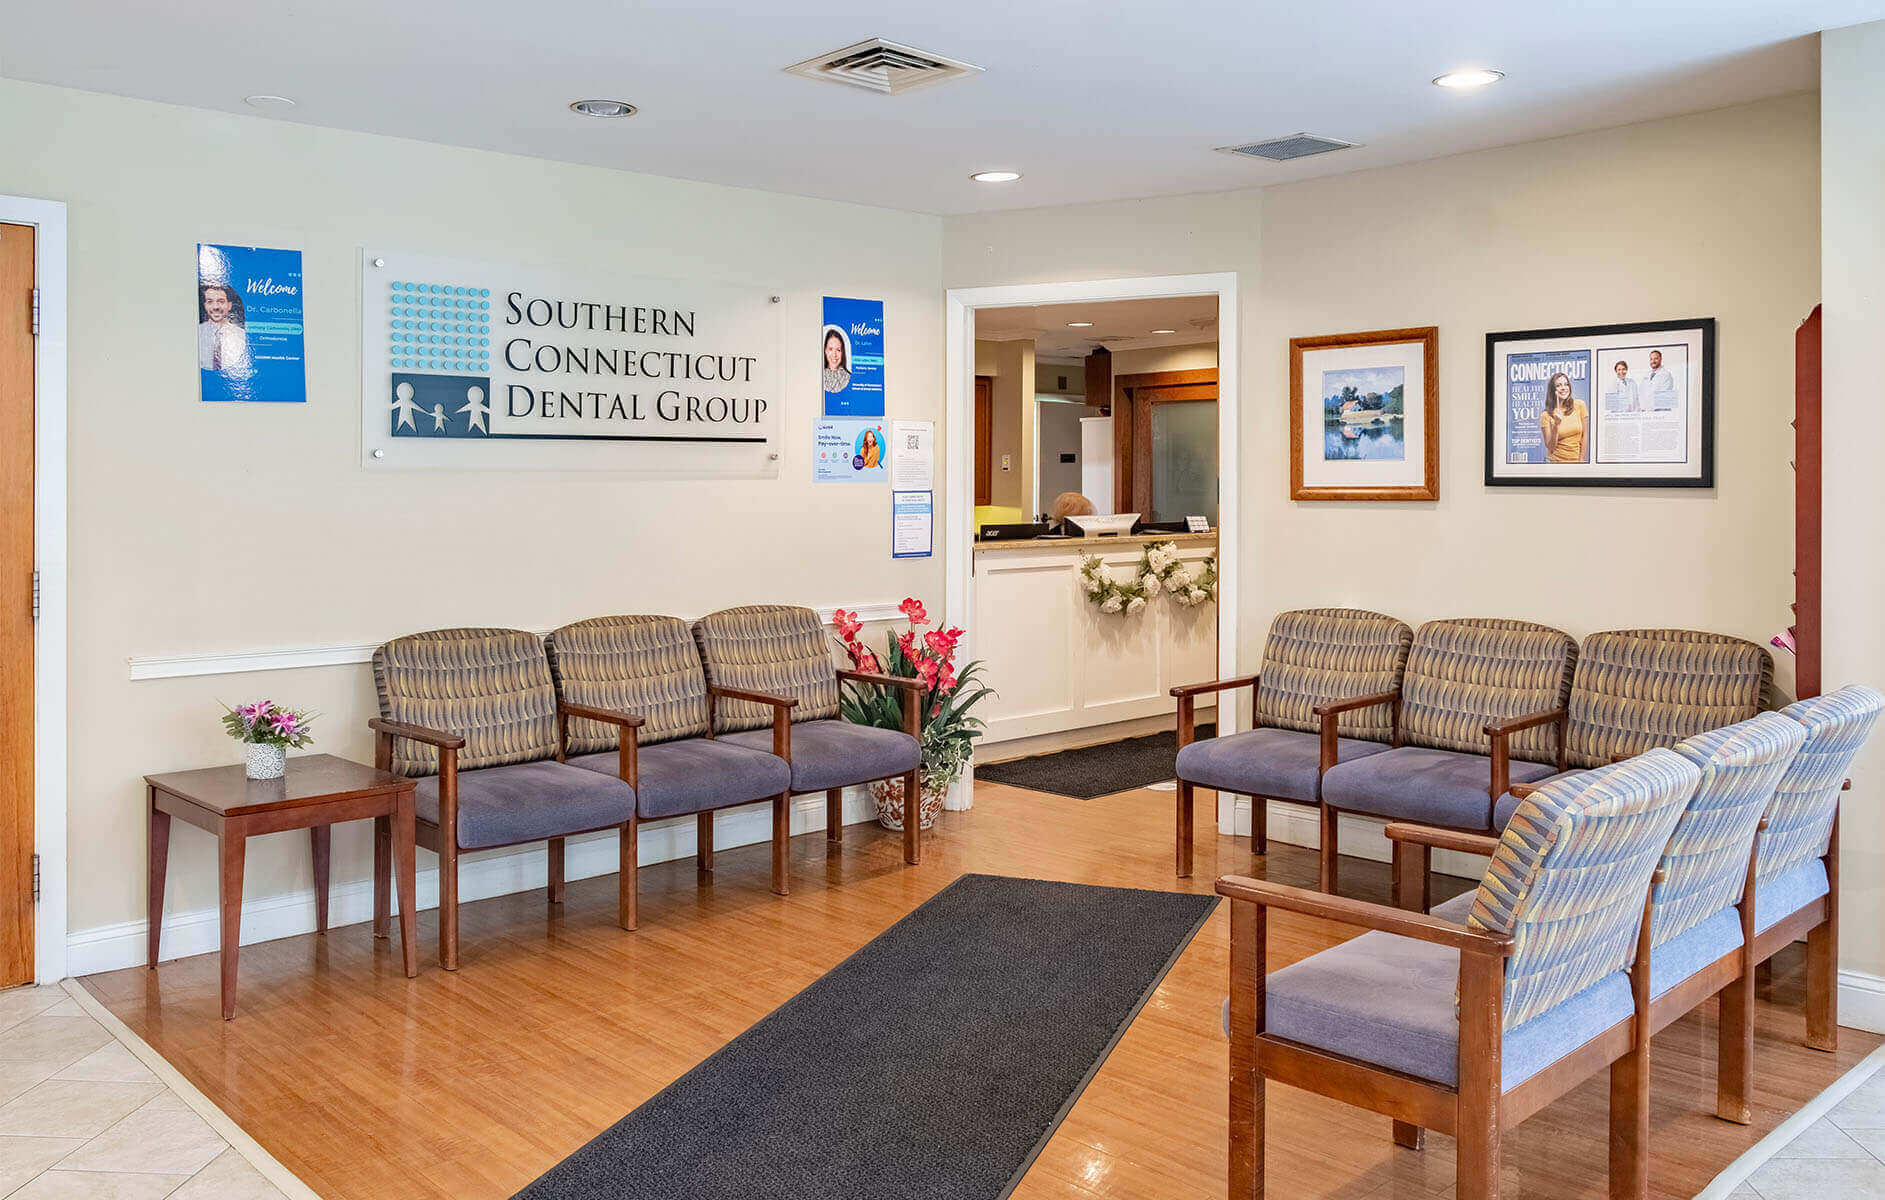 Southern Connecticut Dental Group_42NorthDental - 010